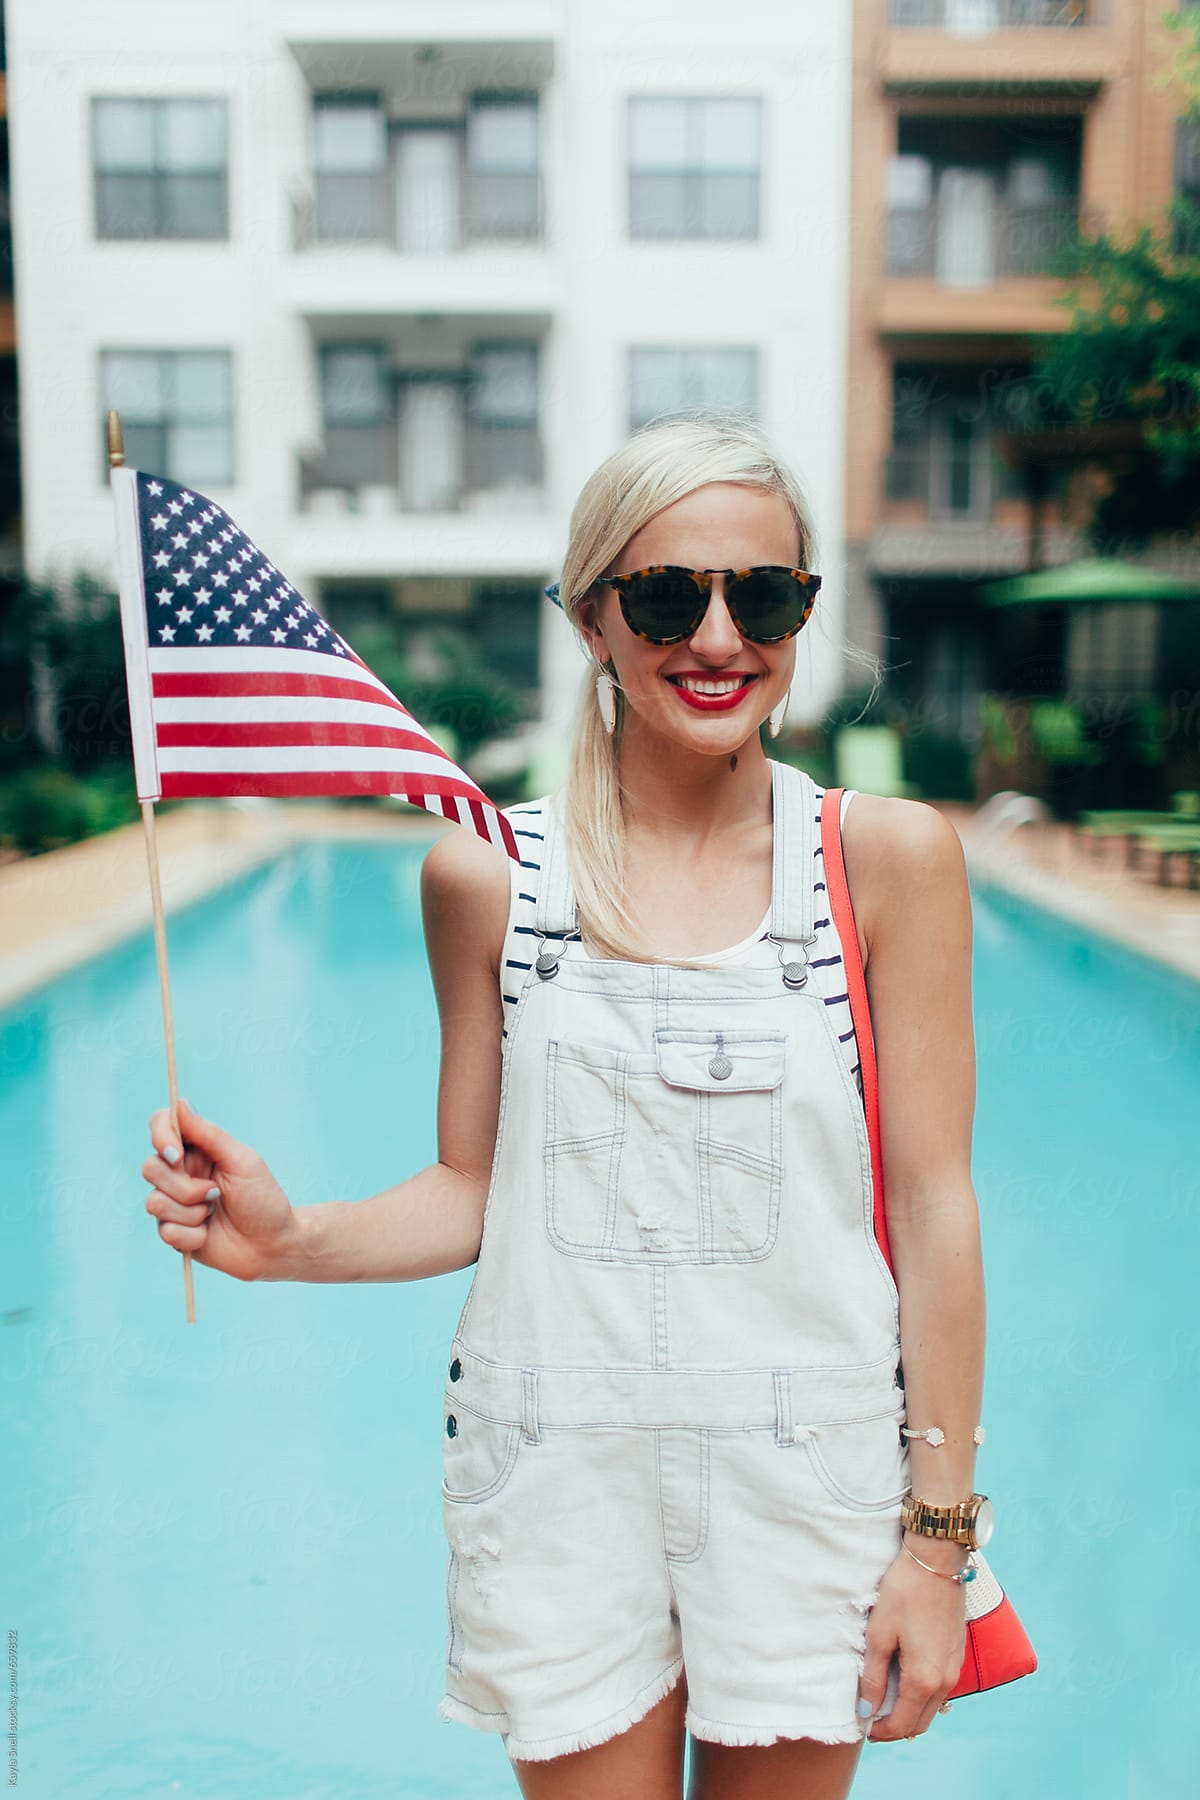 Young woman standing by a pool smiling with an American flag